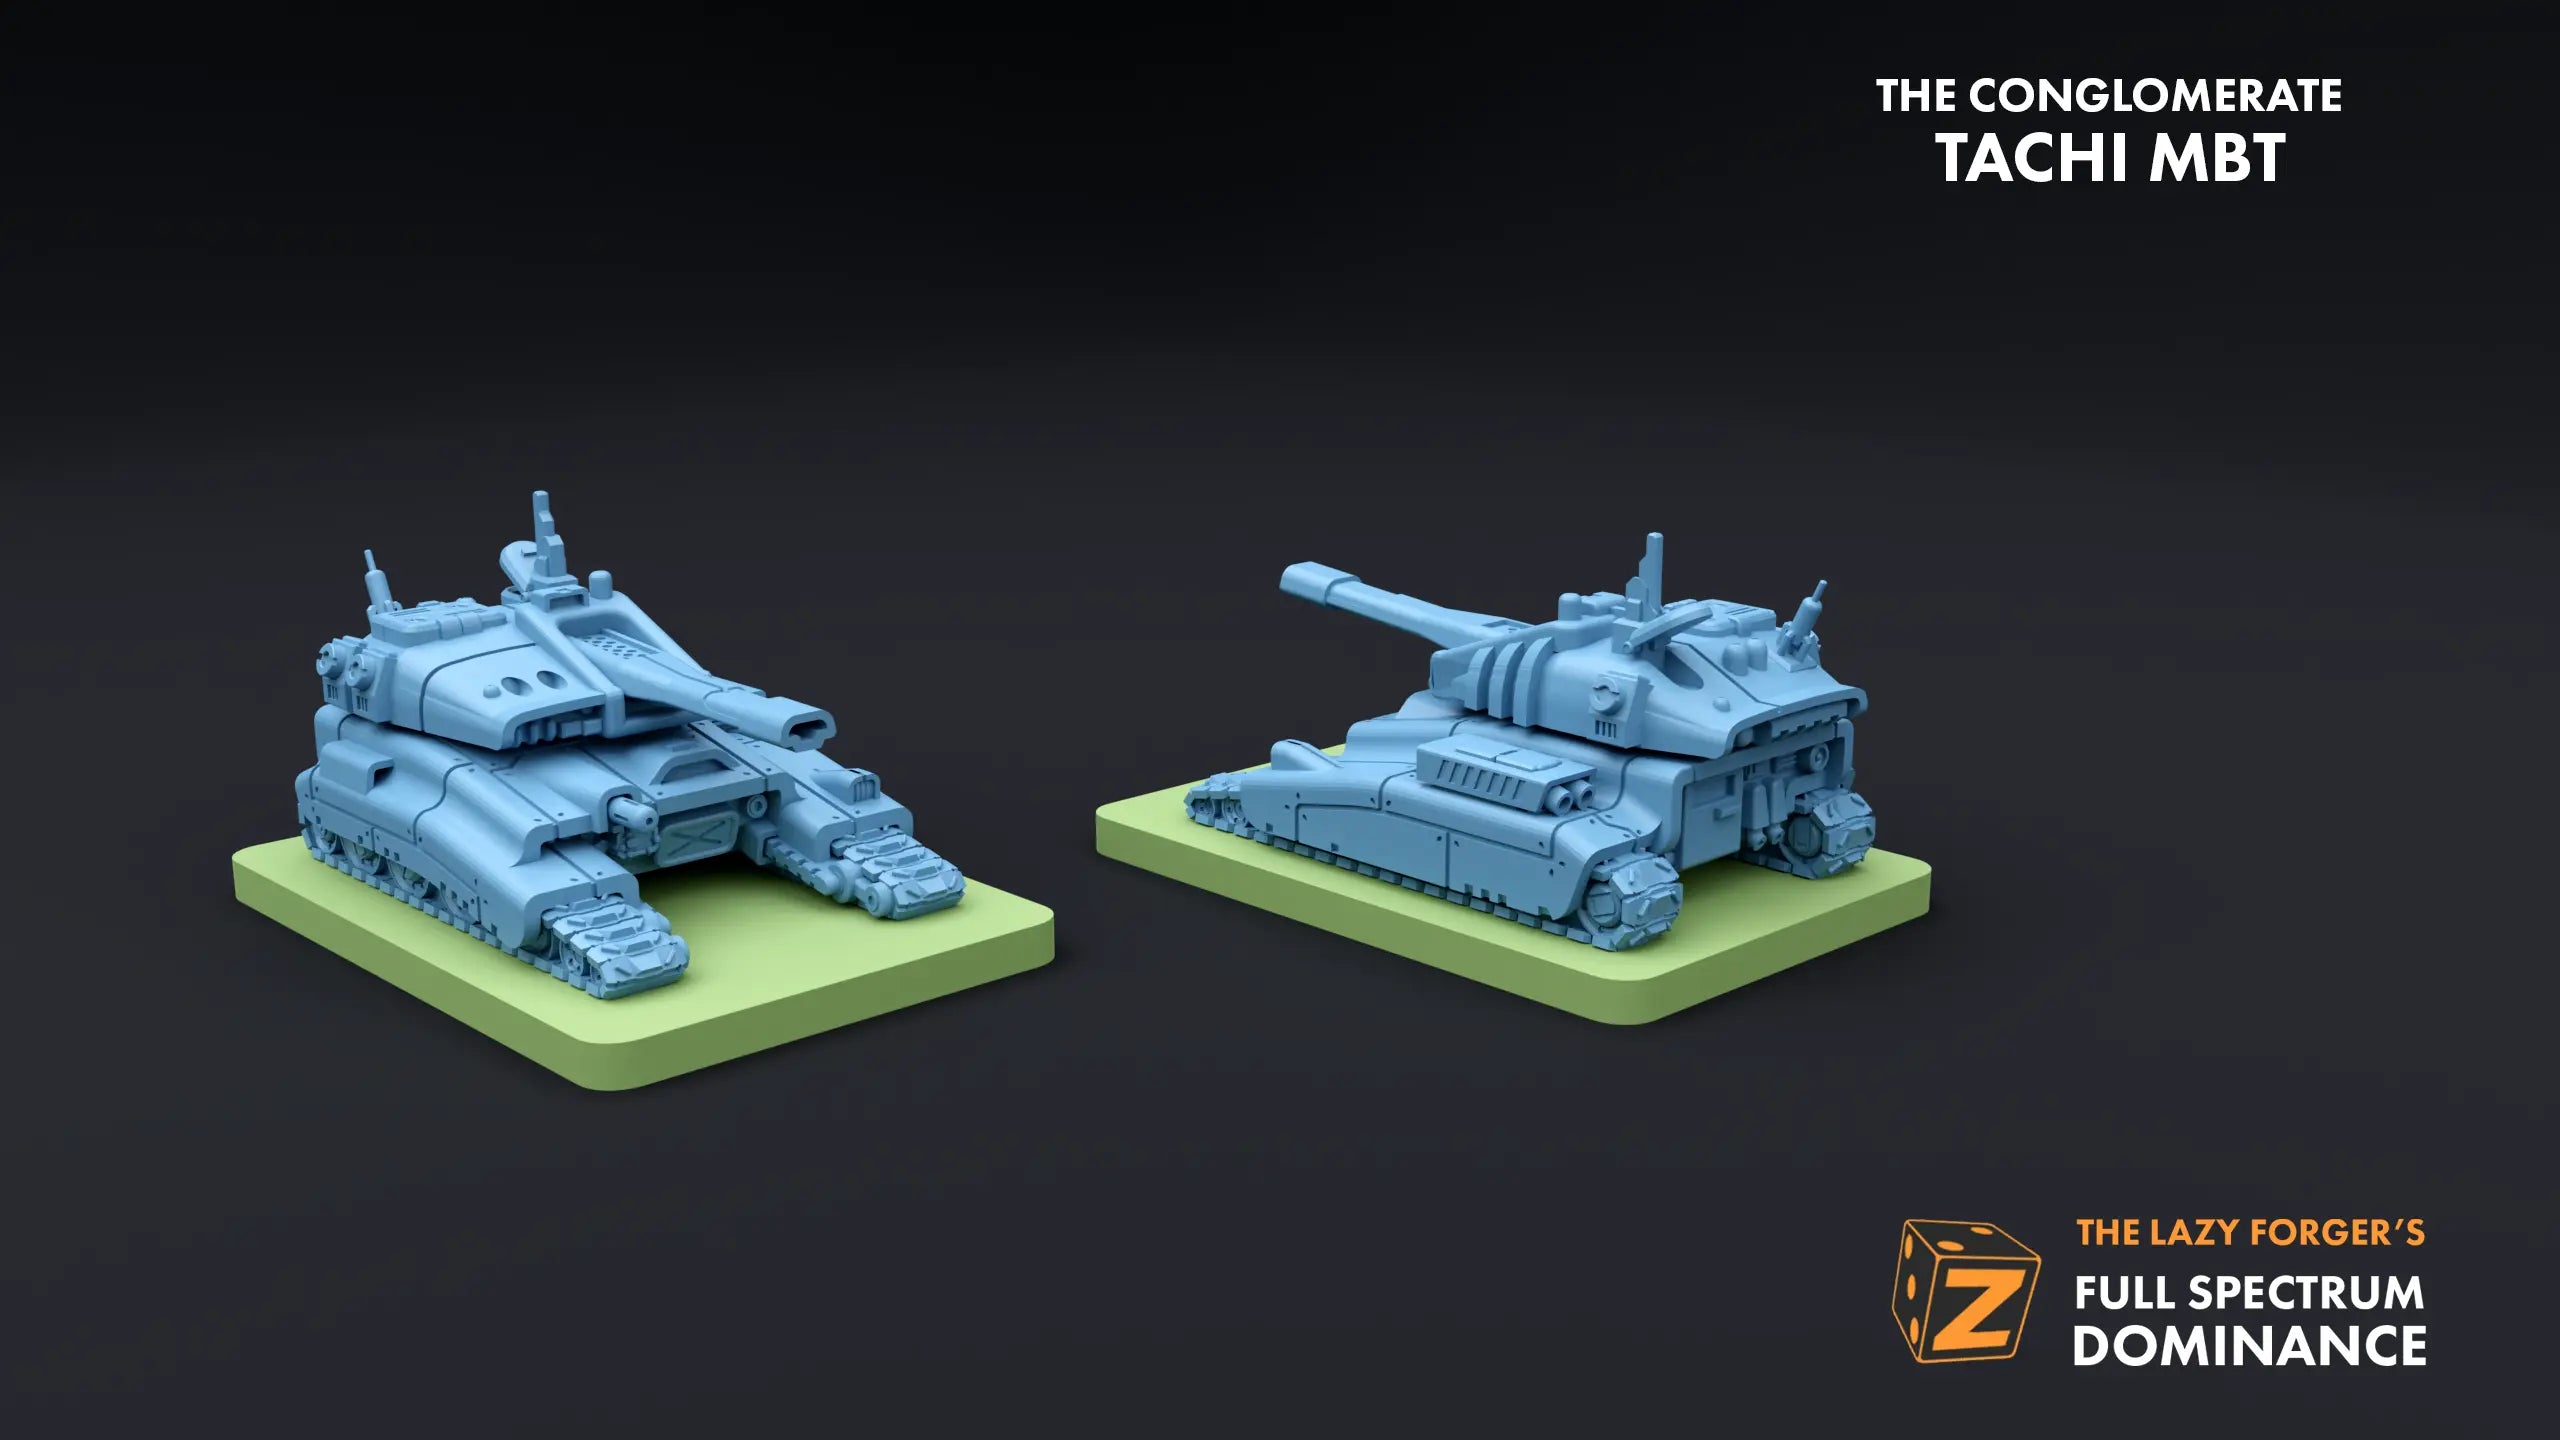 Tachi MBT Pack (2) - The Conglomerate The Lazy Forger